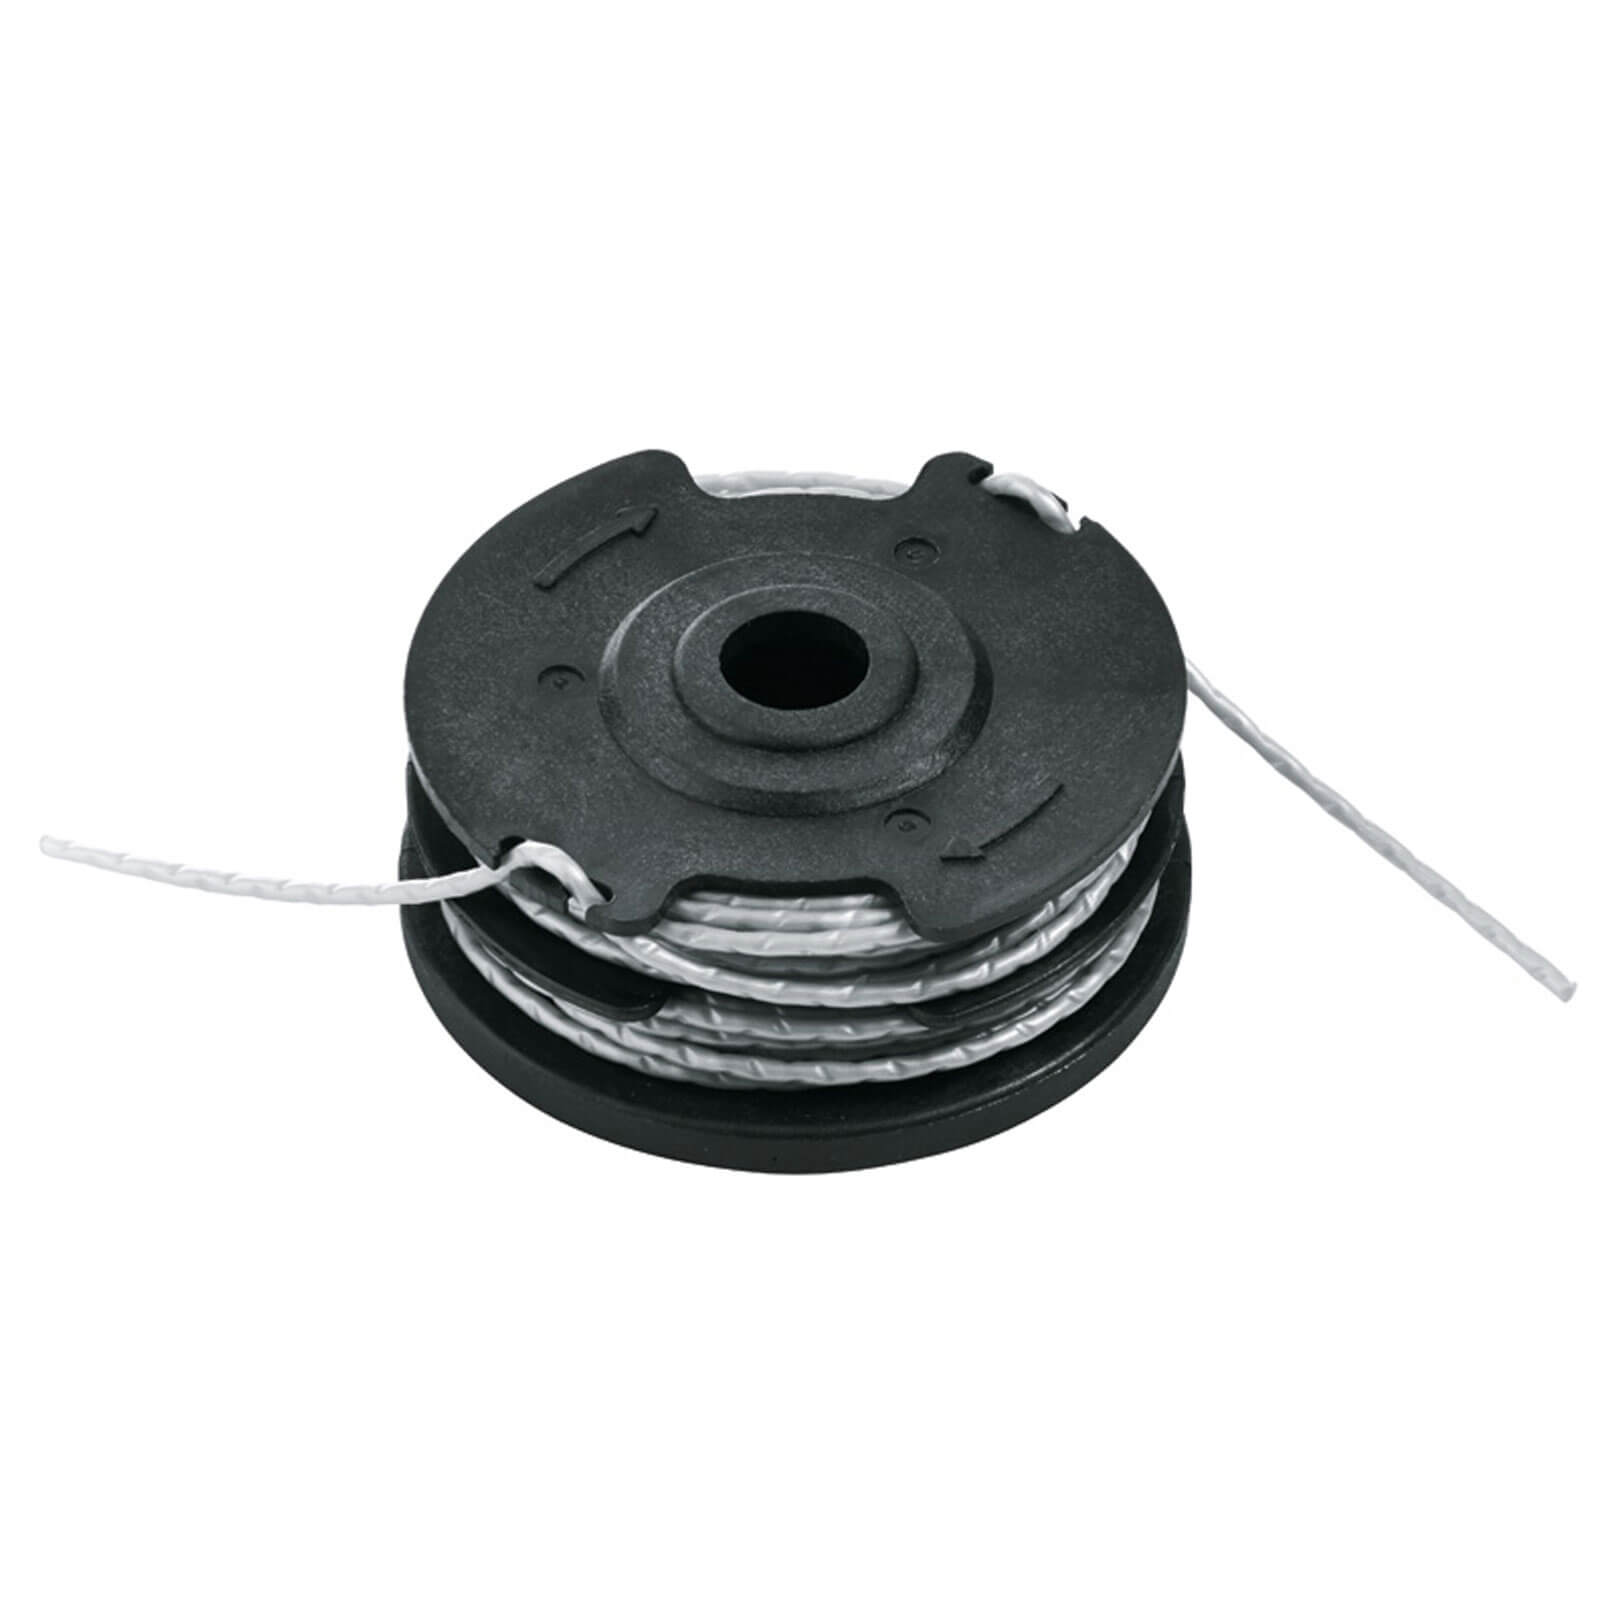 Bosch Genuine Spool and Line for ART 24, 27, 30 and 36v Grass Trimmers Pack of 1